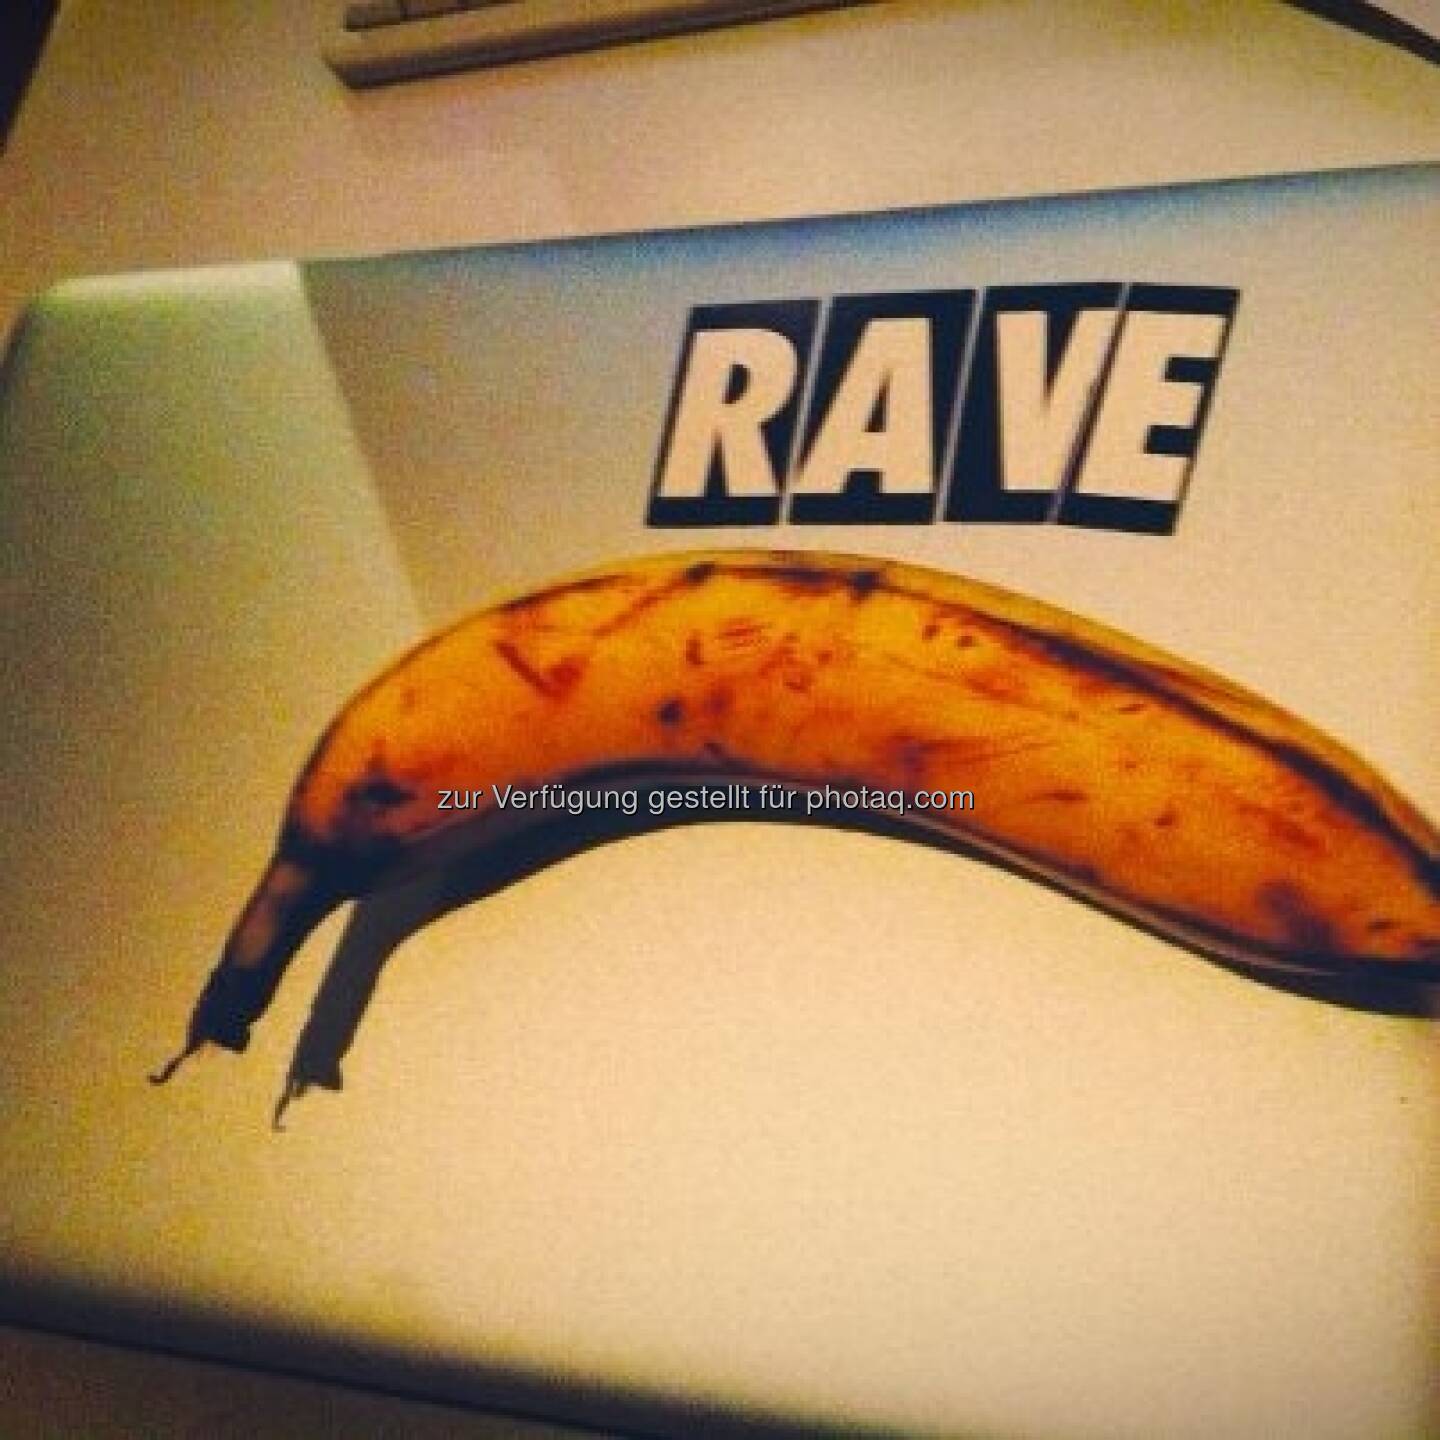 rave banana mac is the title of my latest mastapiece https://www.facebook.com/bananingofficial